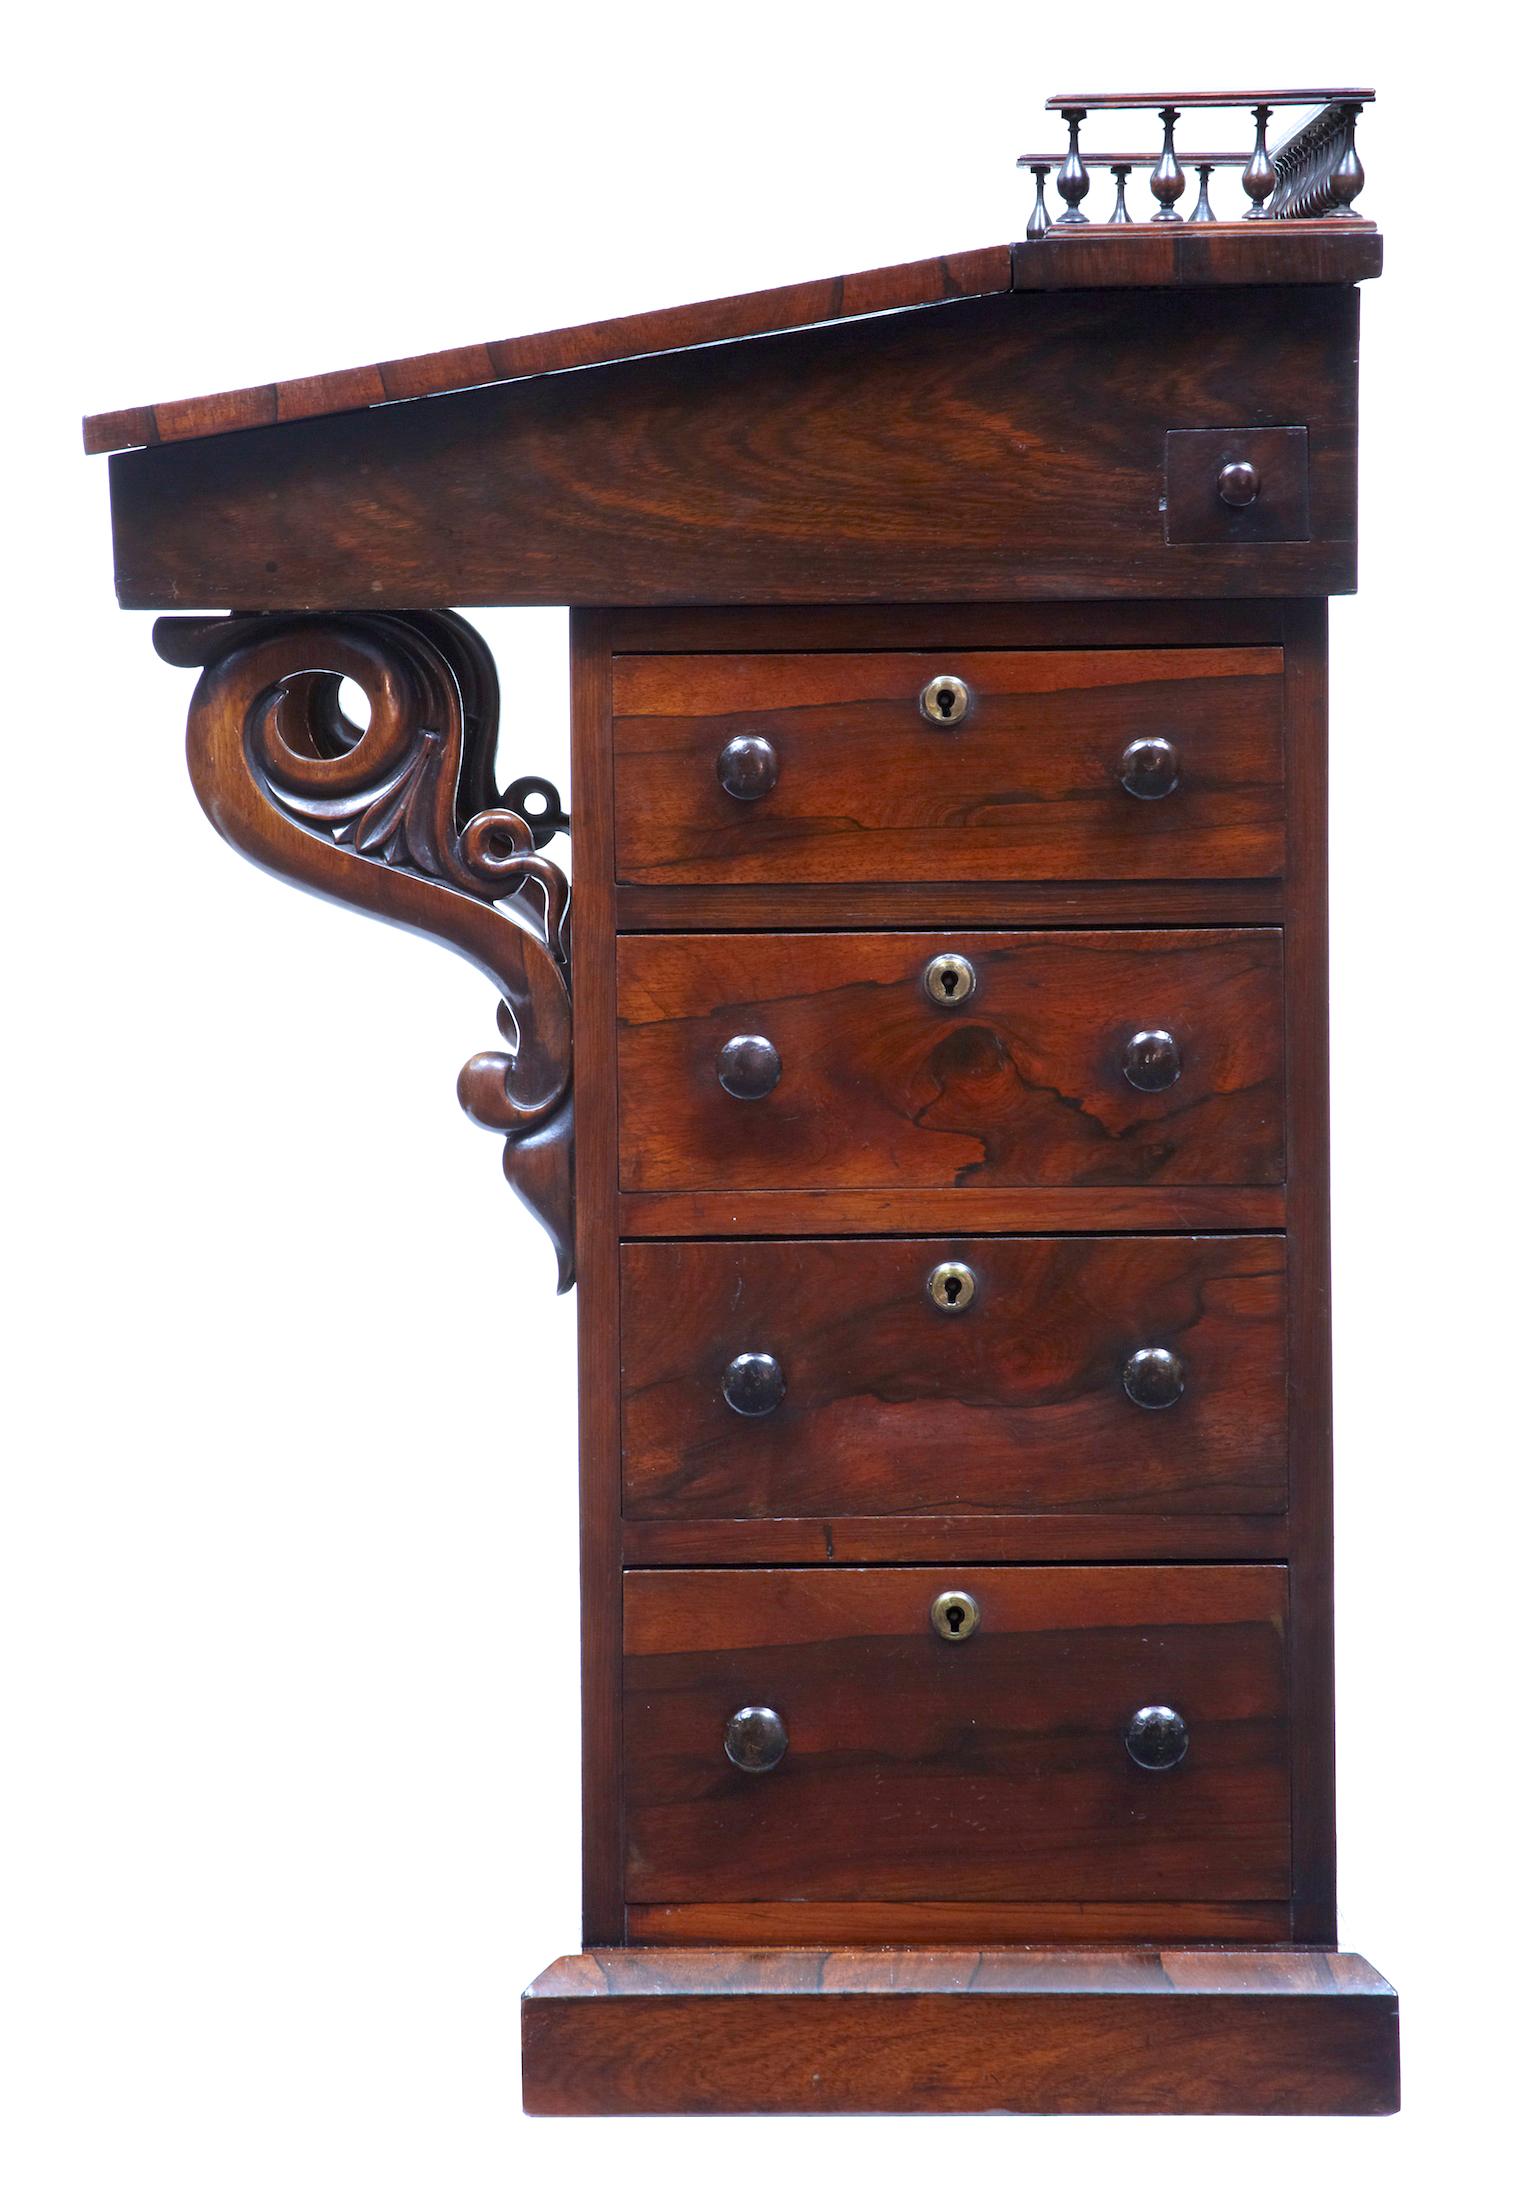 Fine quality regency davenport, circa 1820. 

Spindle gallery to the top leading to the original leather writing surface. Top opens to reveal a richly colored interior with 2 drawers.
4 lockable drawers to one side with pull out pen tray,